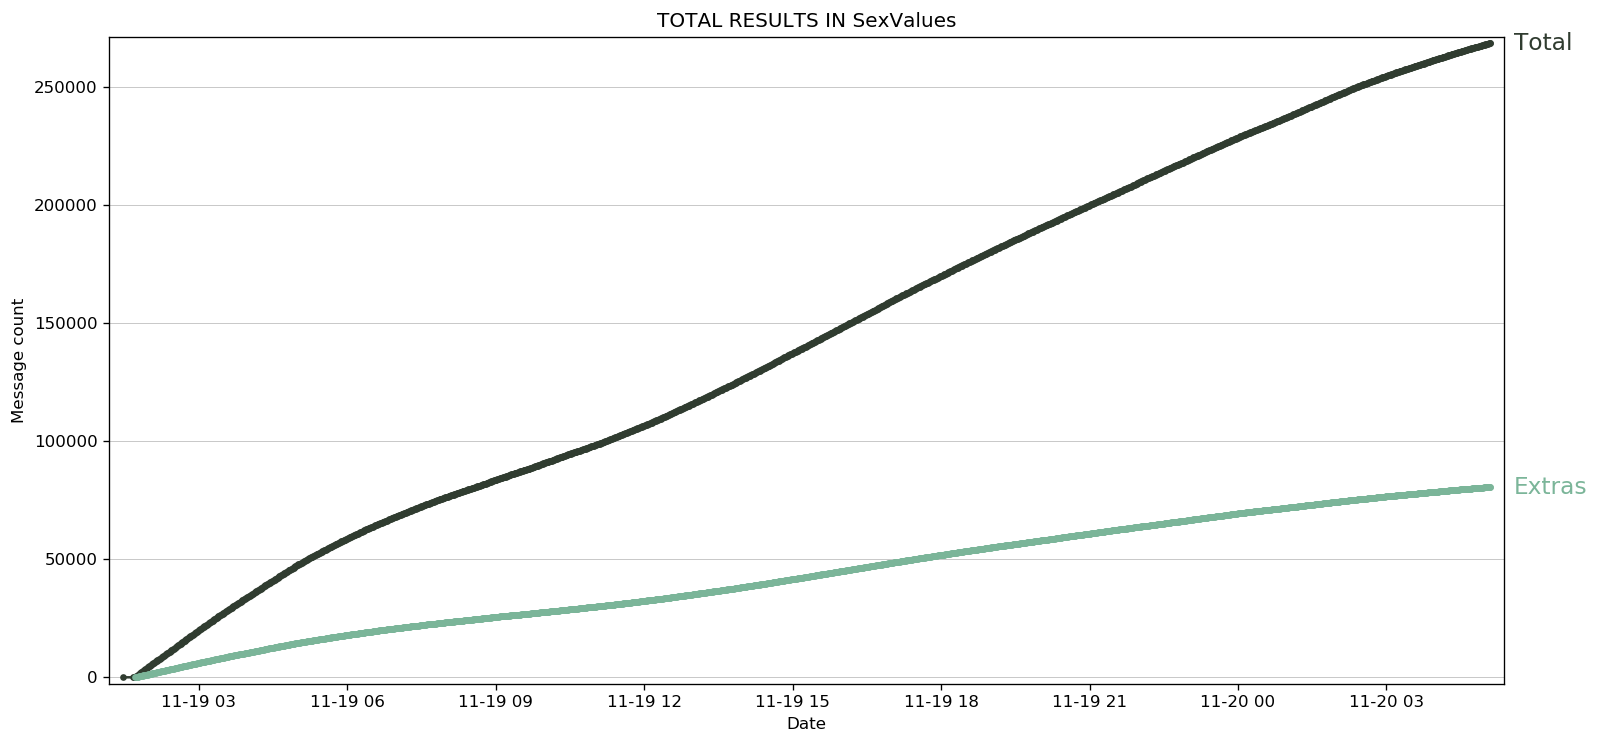 Another total results graph